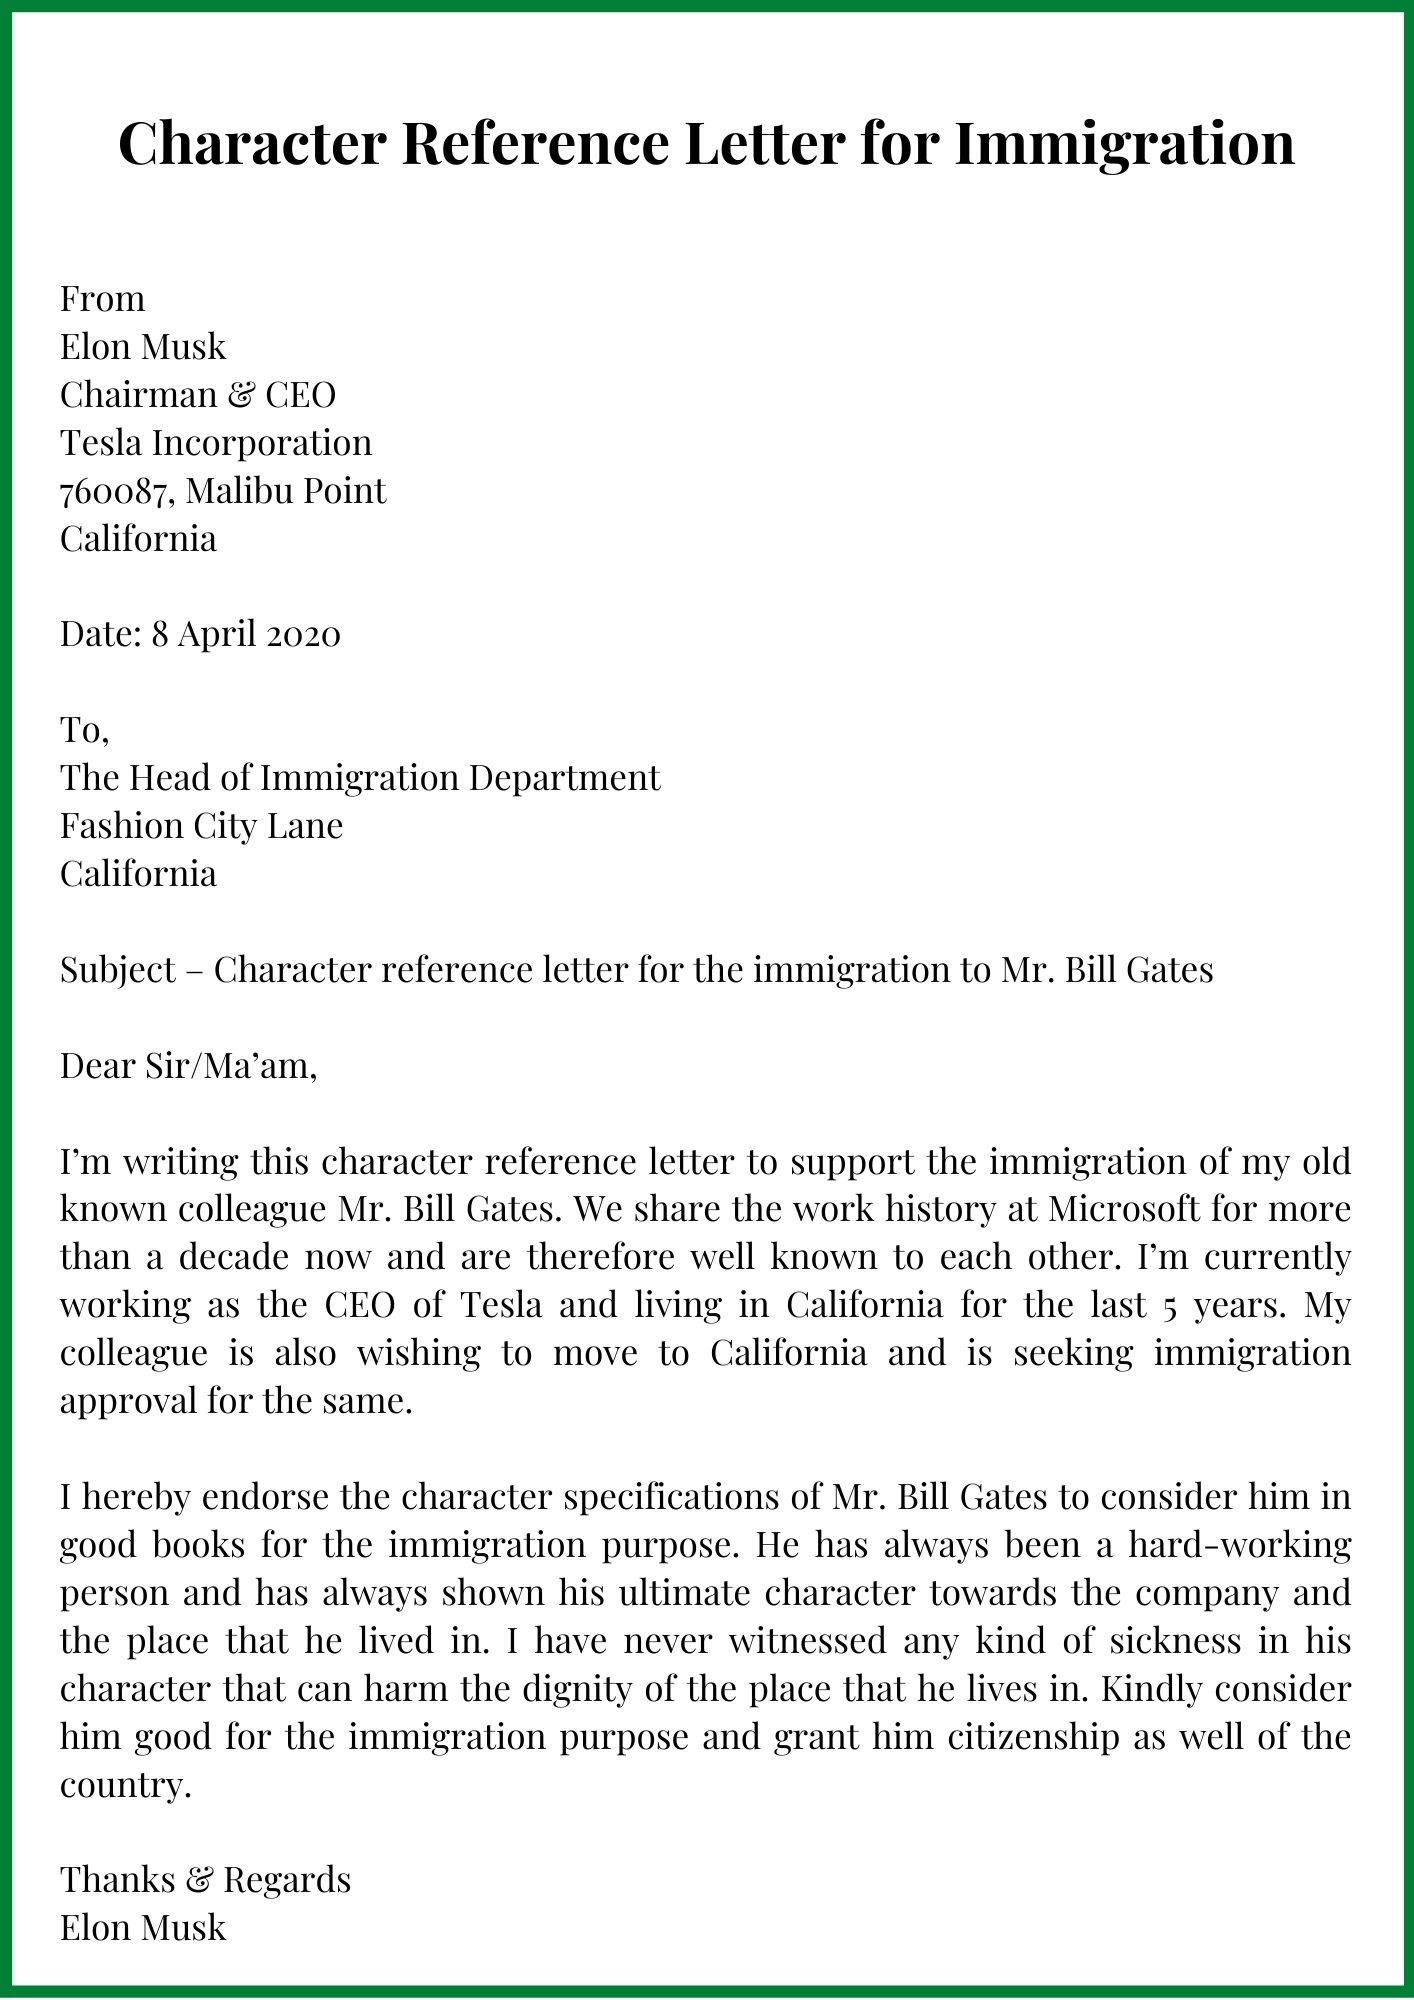 character-reference-letter-for-immigration-pdf-character-reference-letter